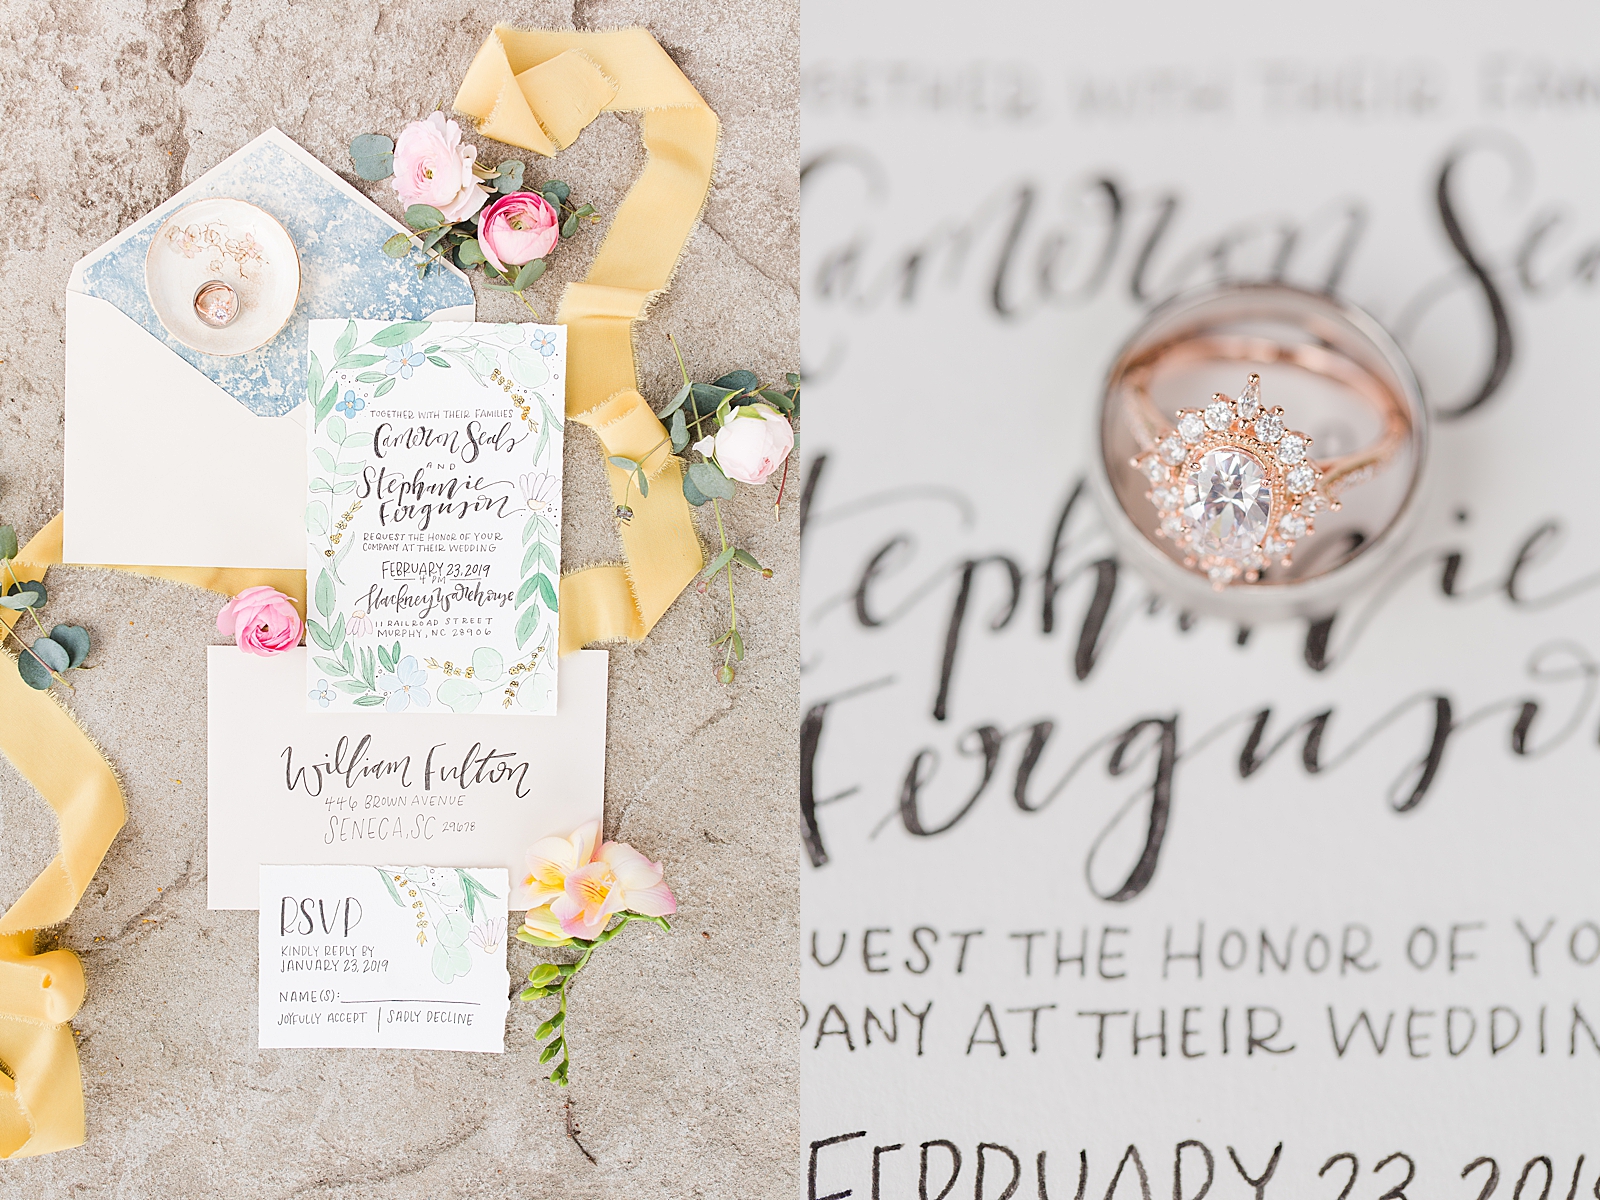 Hackney Warehouse Wedding Invitation Suite with Yellow Ribbon and Rings in dish and Detail of Wedding Rings on Invitation Photos